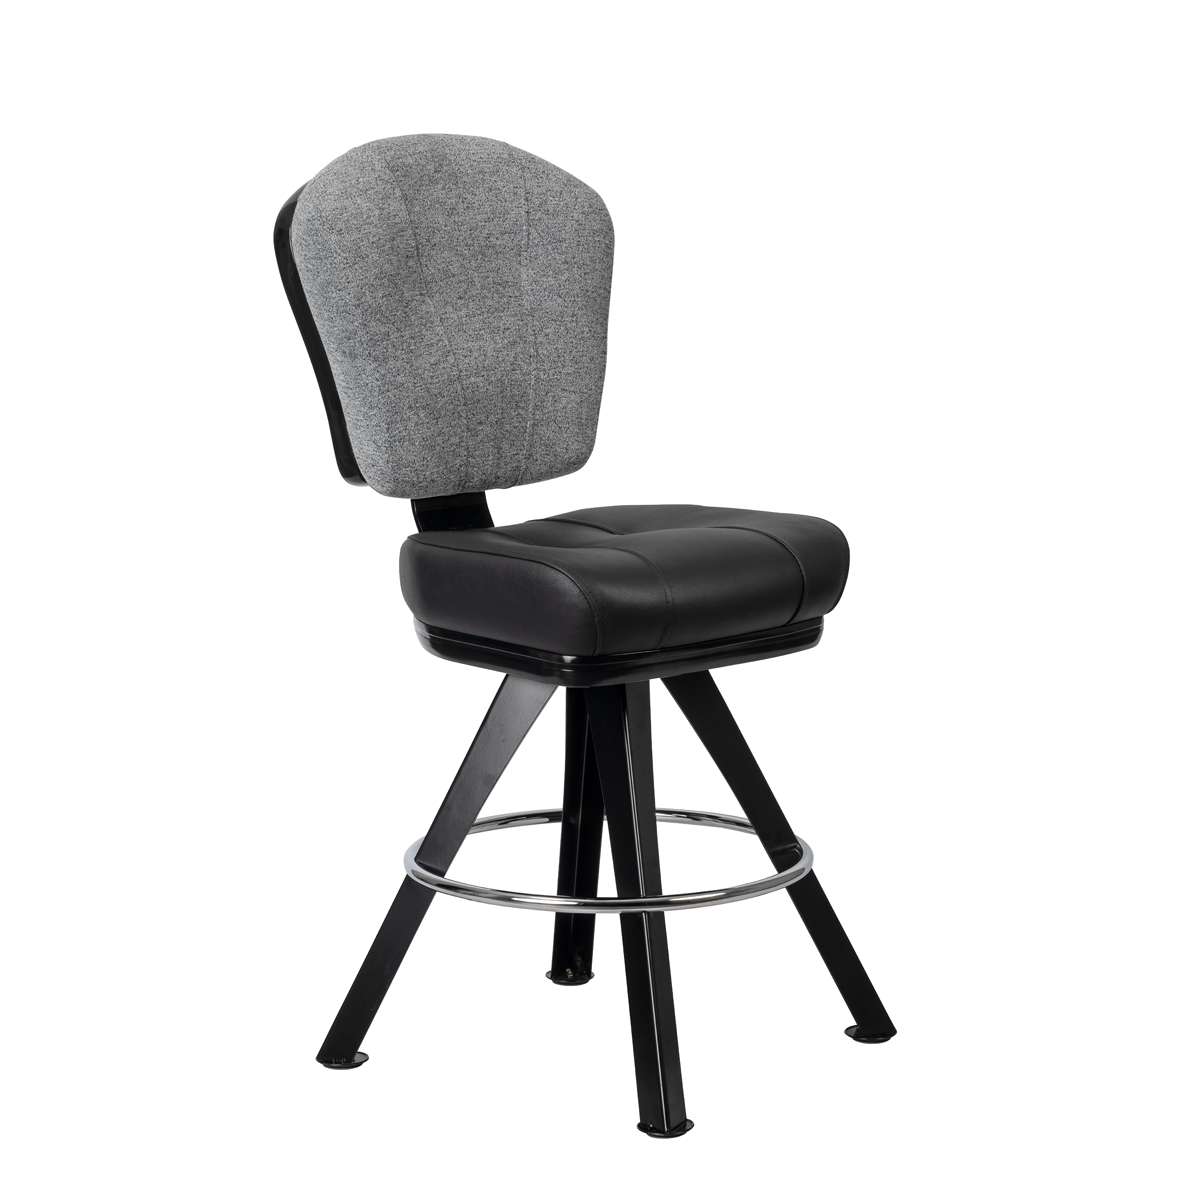 monte carlo casino gaming stool is the ideal chair for slot machines and table games